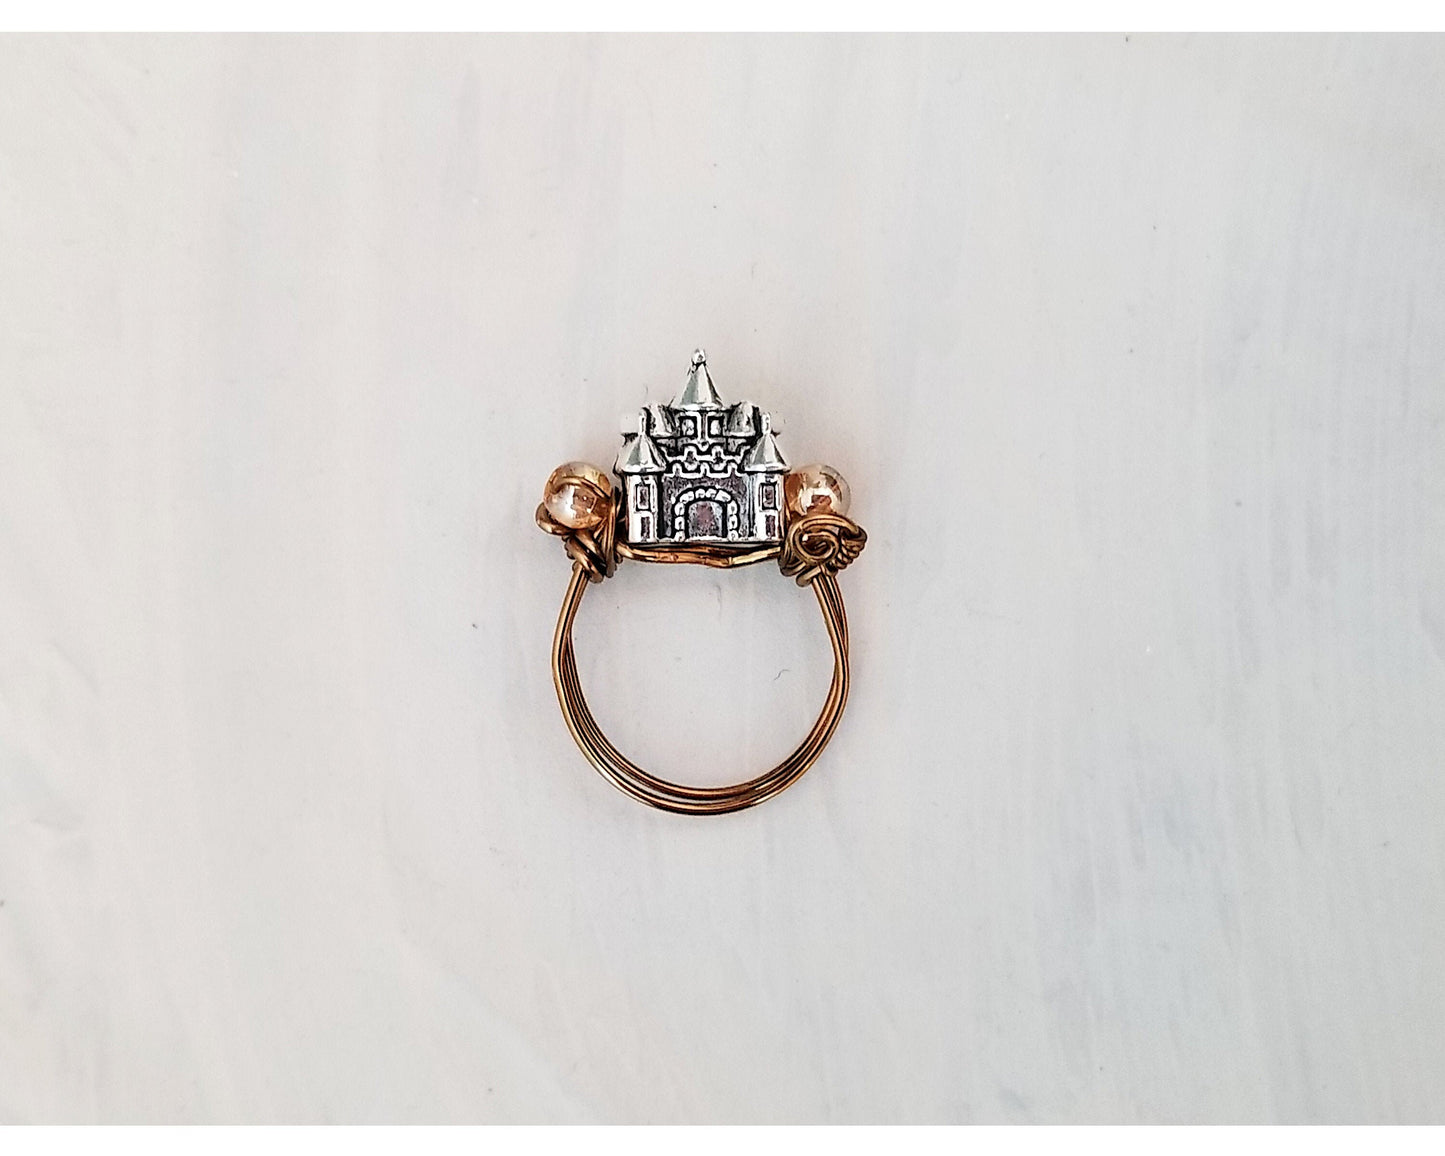 Castle Ring in Peach Champagne, Fairy Tale, Wedding, Bridesmaid, Gothic, Renaissance, Medieval, Choice of Colors and Metals